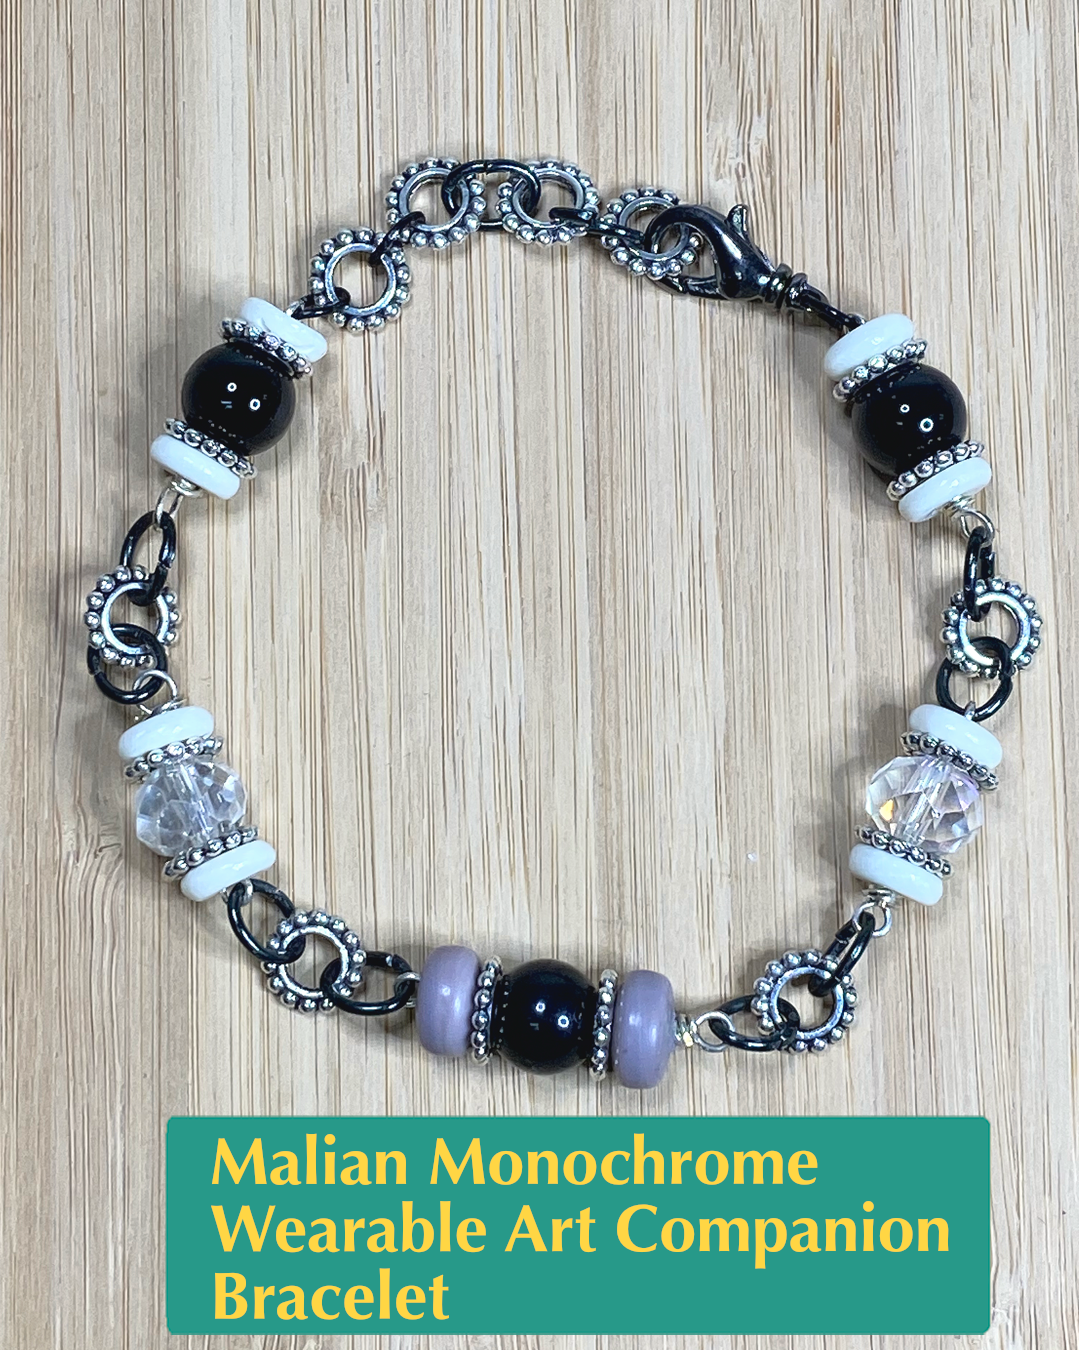 Handmade wearable art bracelet made from black onyx, white bone, clear and white salvaged beads, and black and silver metals